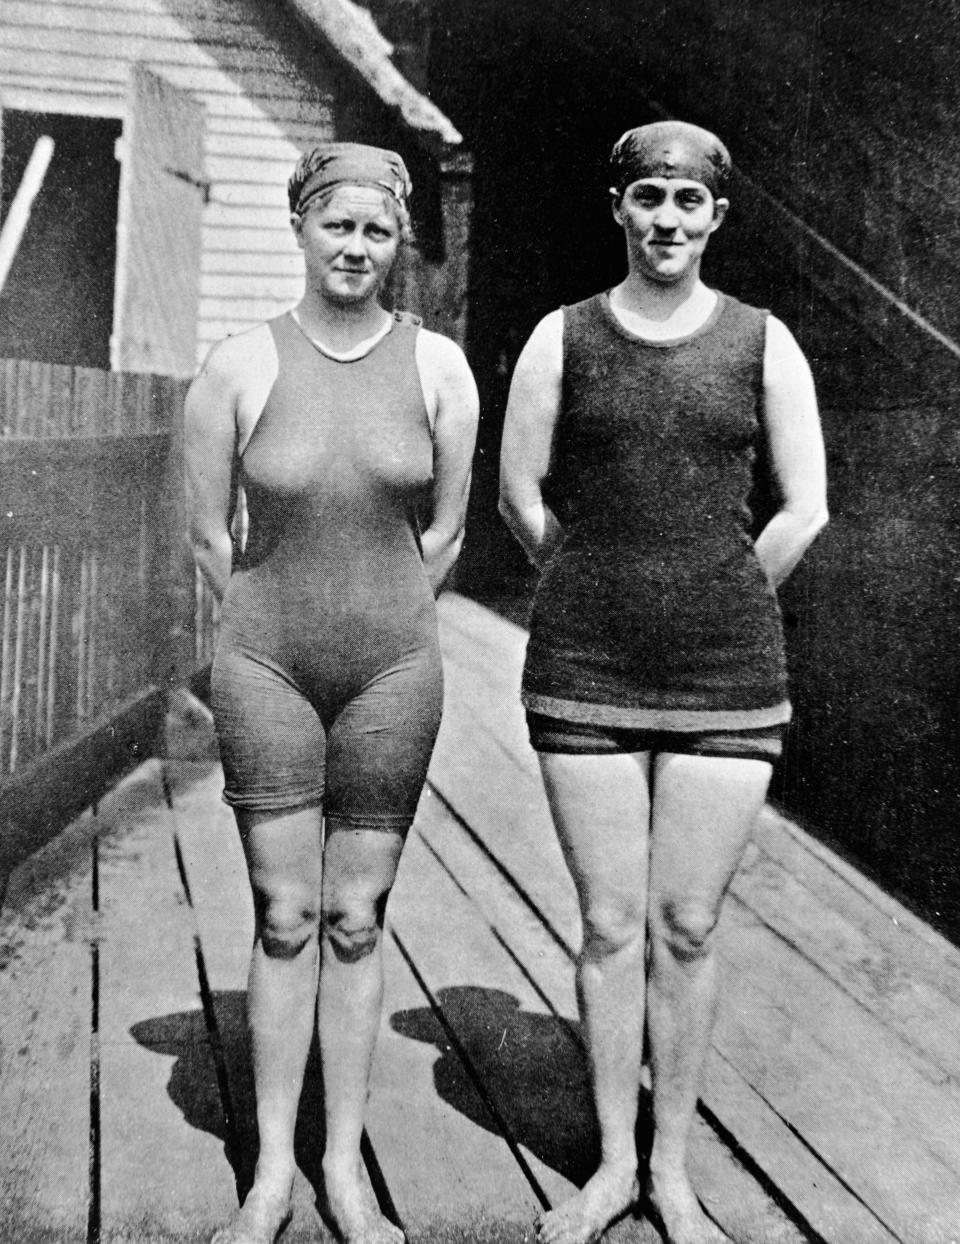 Two female swimmers standing on a wooden patio pose for a black and white photo in front of a house